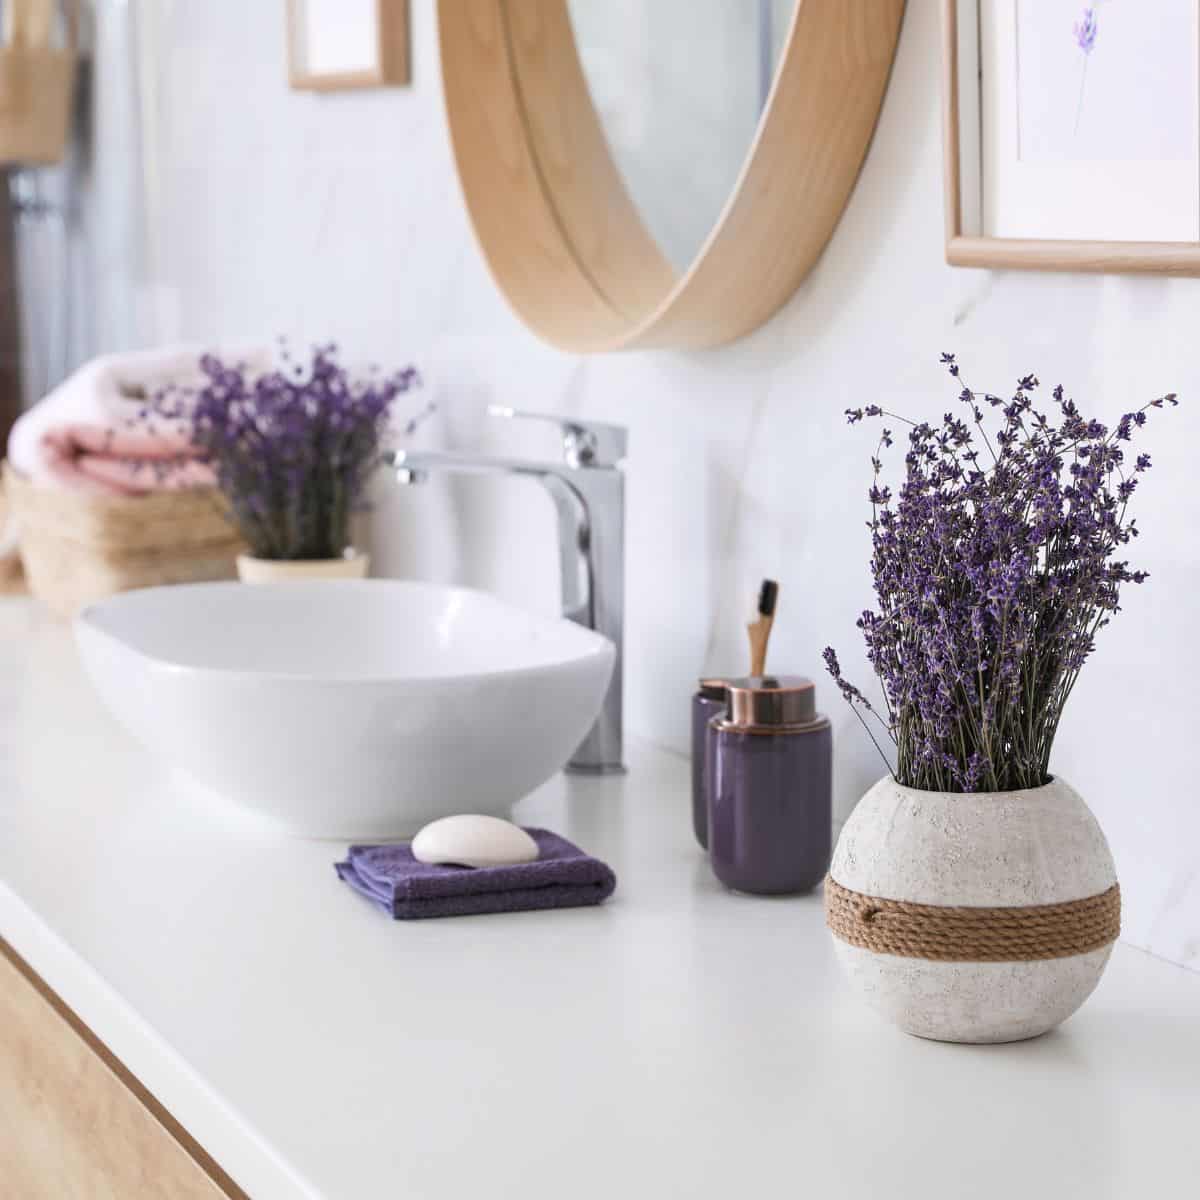 A bathroom counter with vases full of lavender on it.